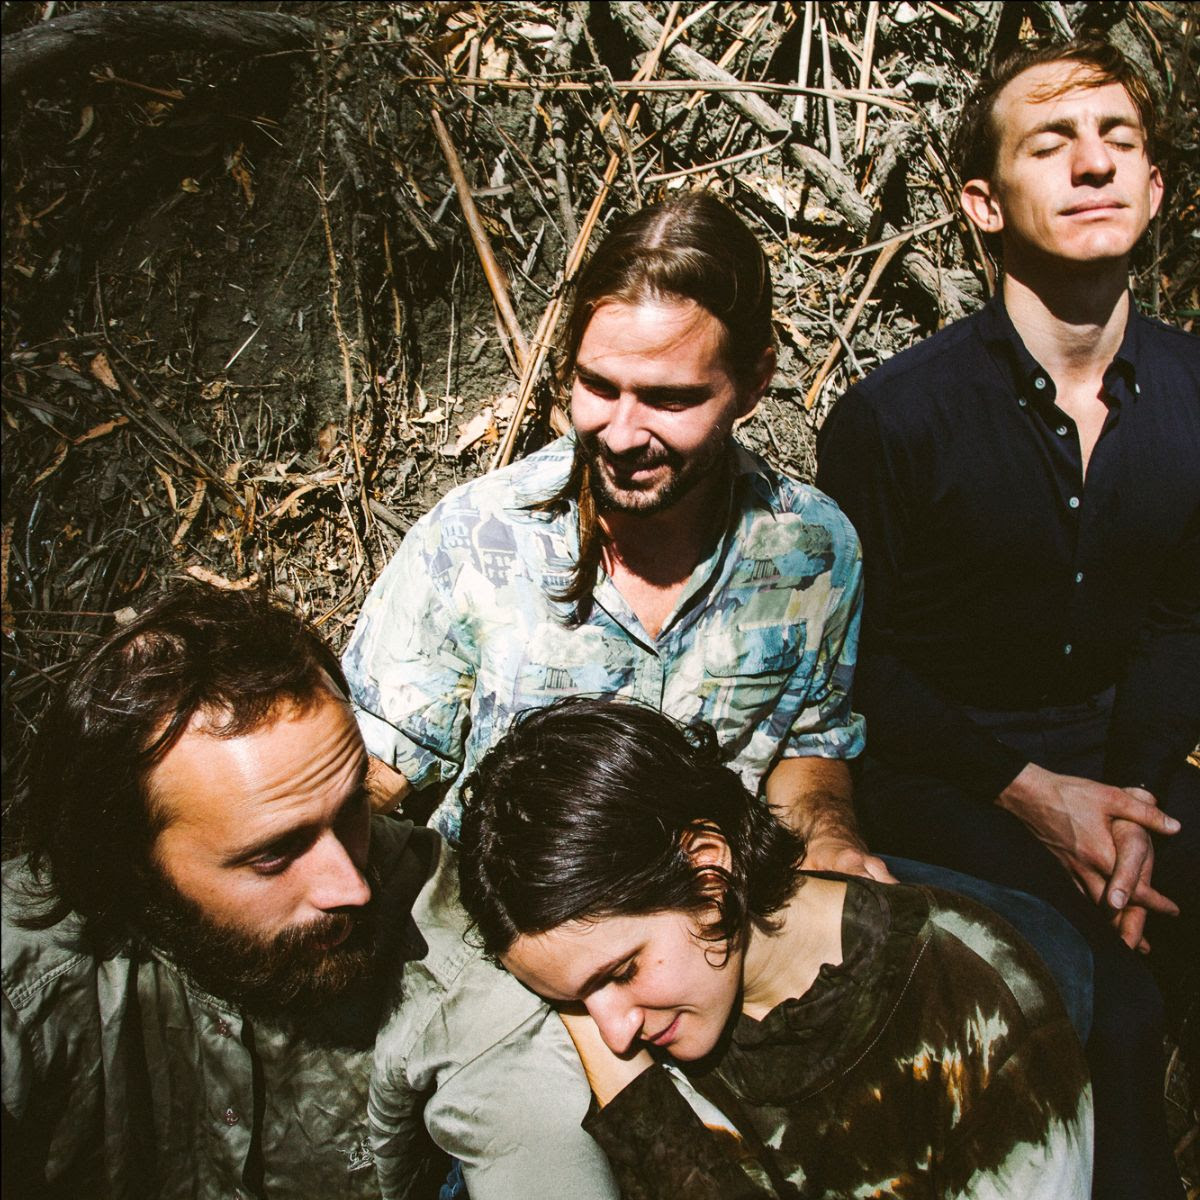 Big Thief have dropped a new single entitled “Love In Mine.” The track, an outtake from the recording sessions of 2019’s album Two Hands